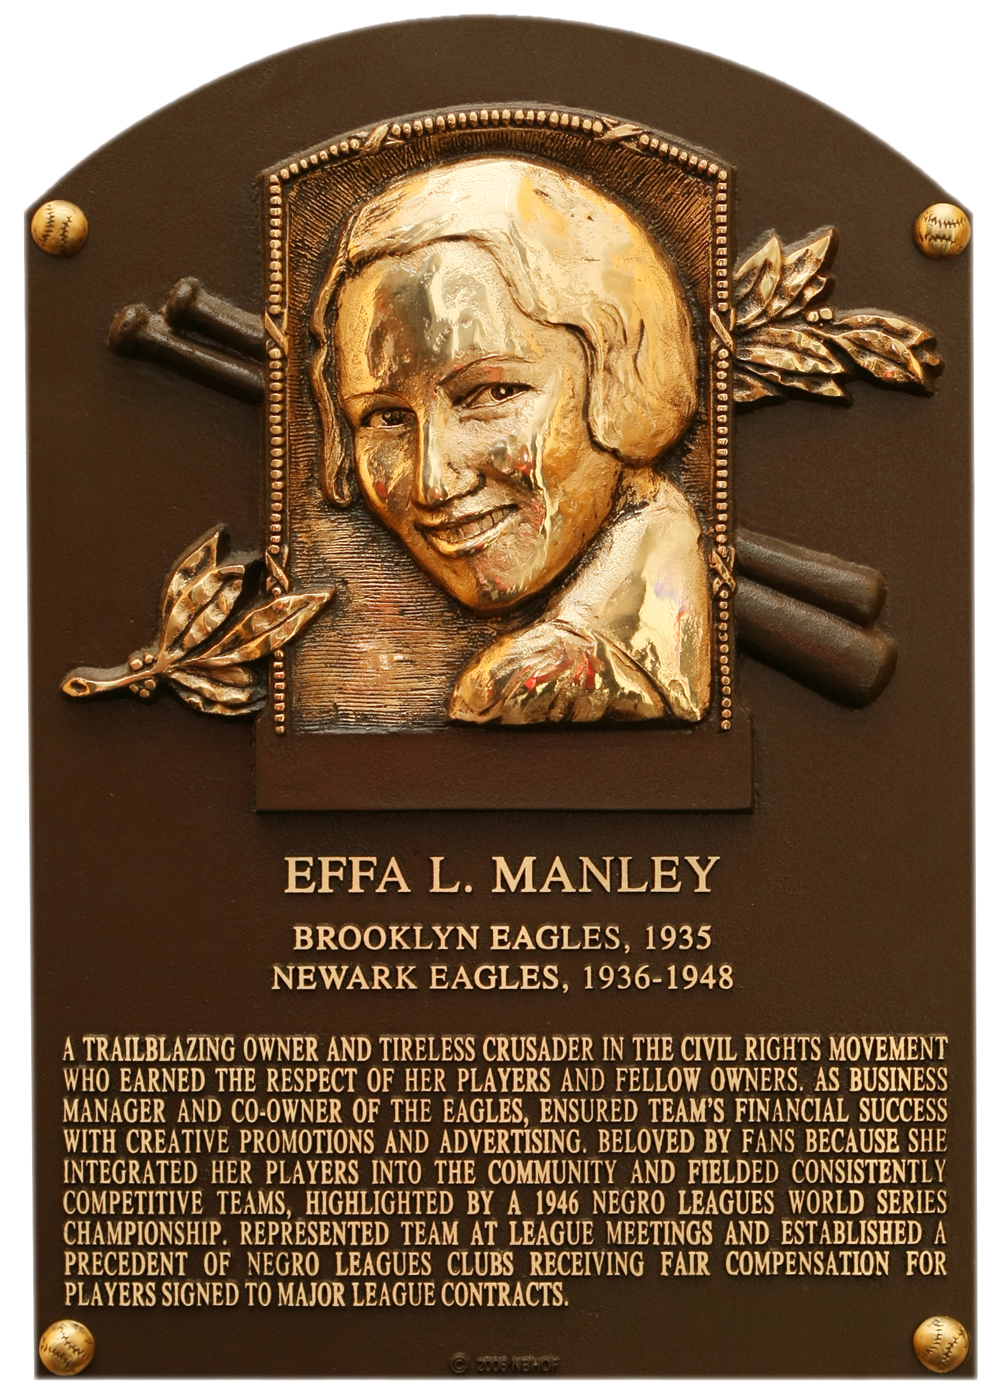 Effa Manley Hall of Fame plaque